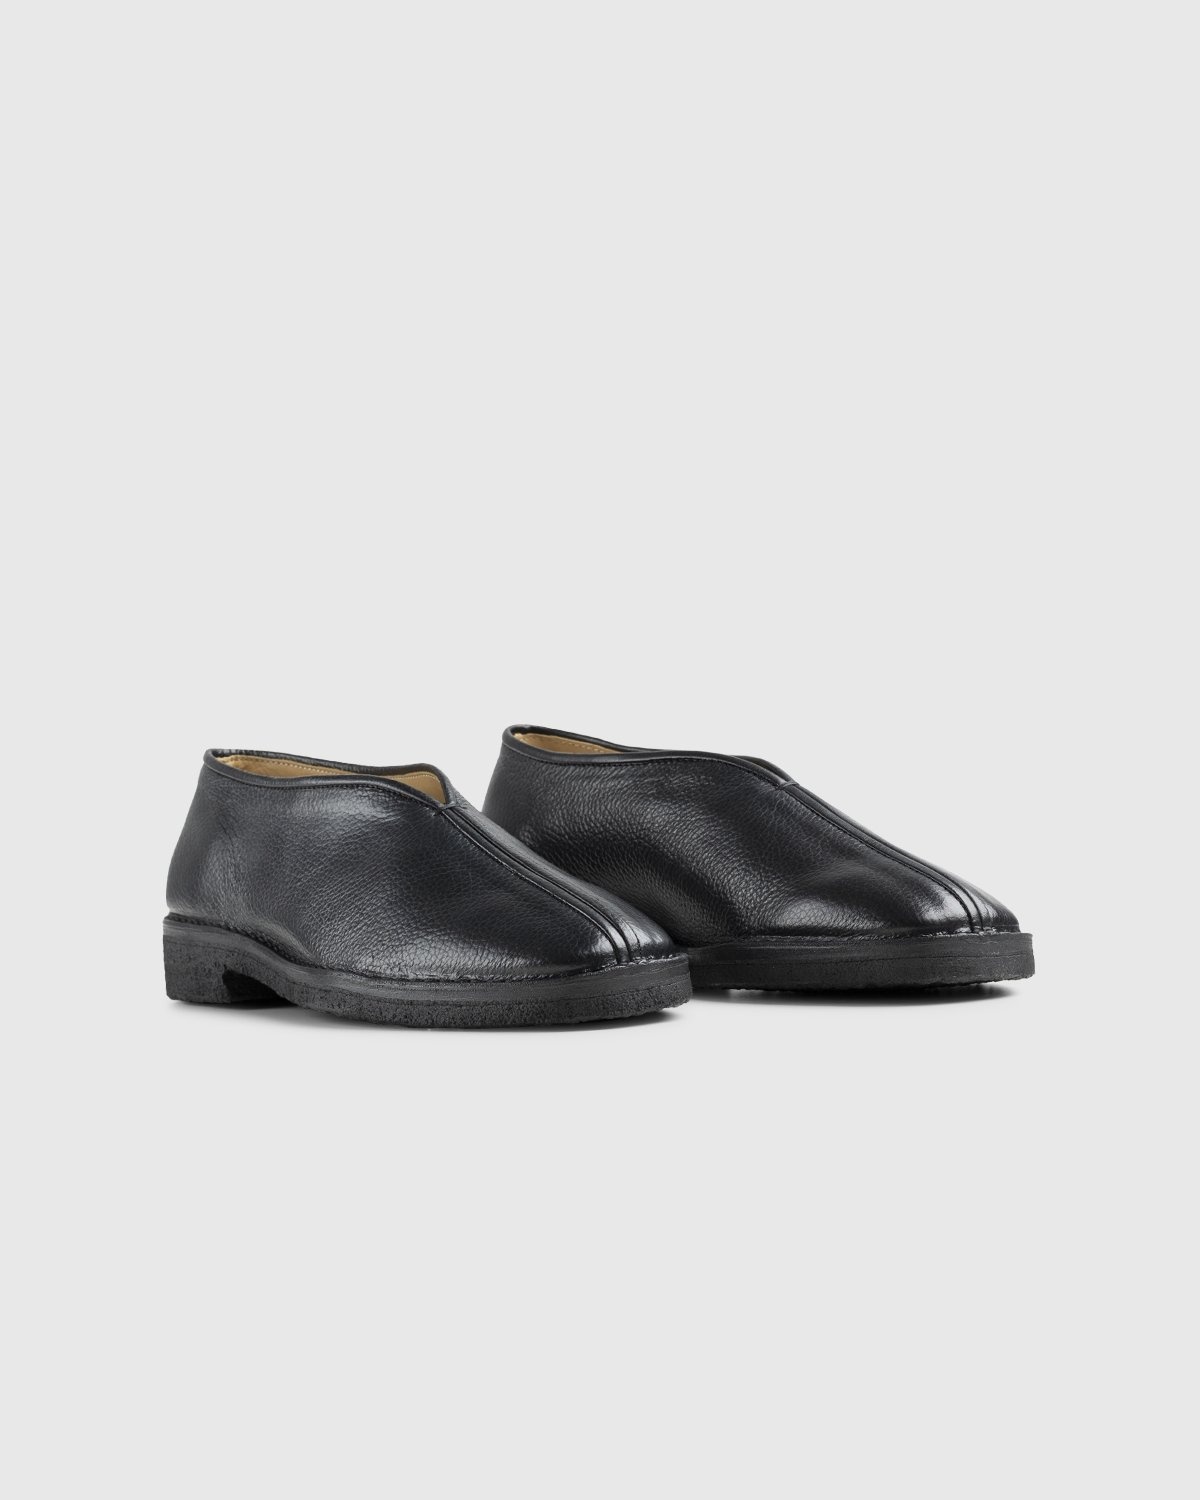 Lemaire – Leather Chinese Slippers Black - Slip-Ons - Black - Image 4